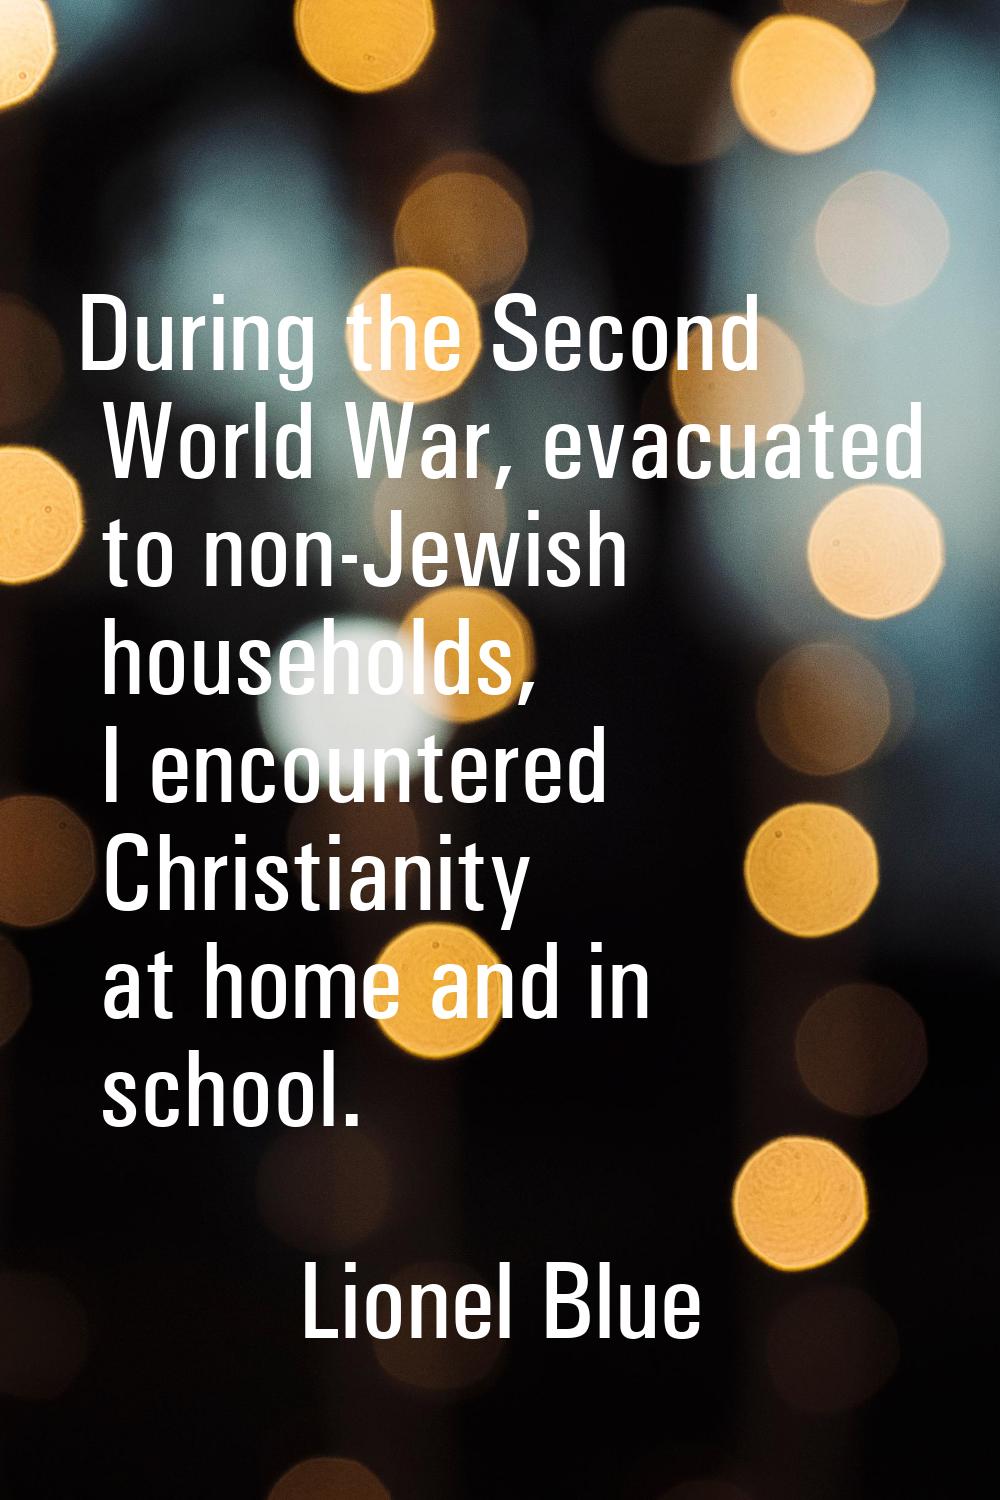 During the Second World War, evacuated to non-Jewish households, I encountered Christianity at home